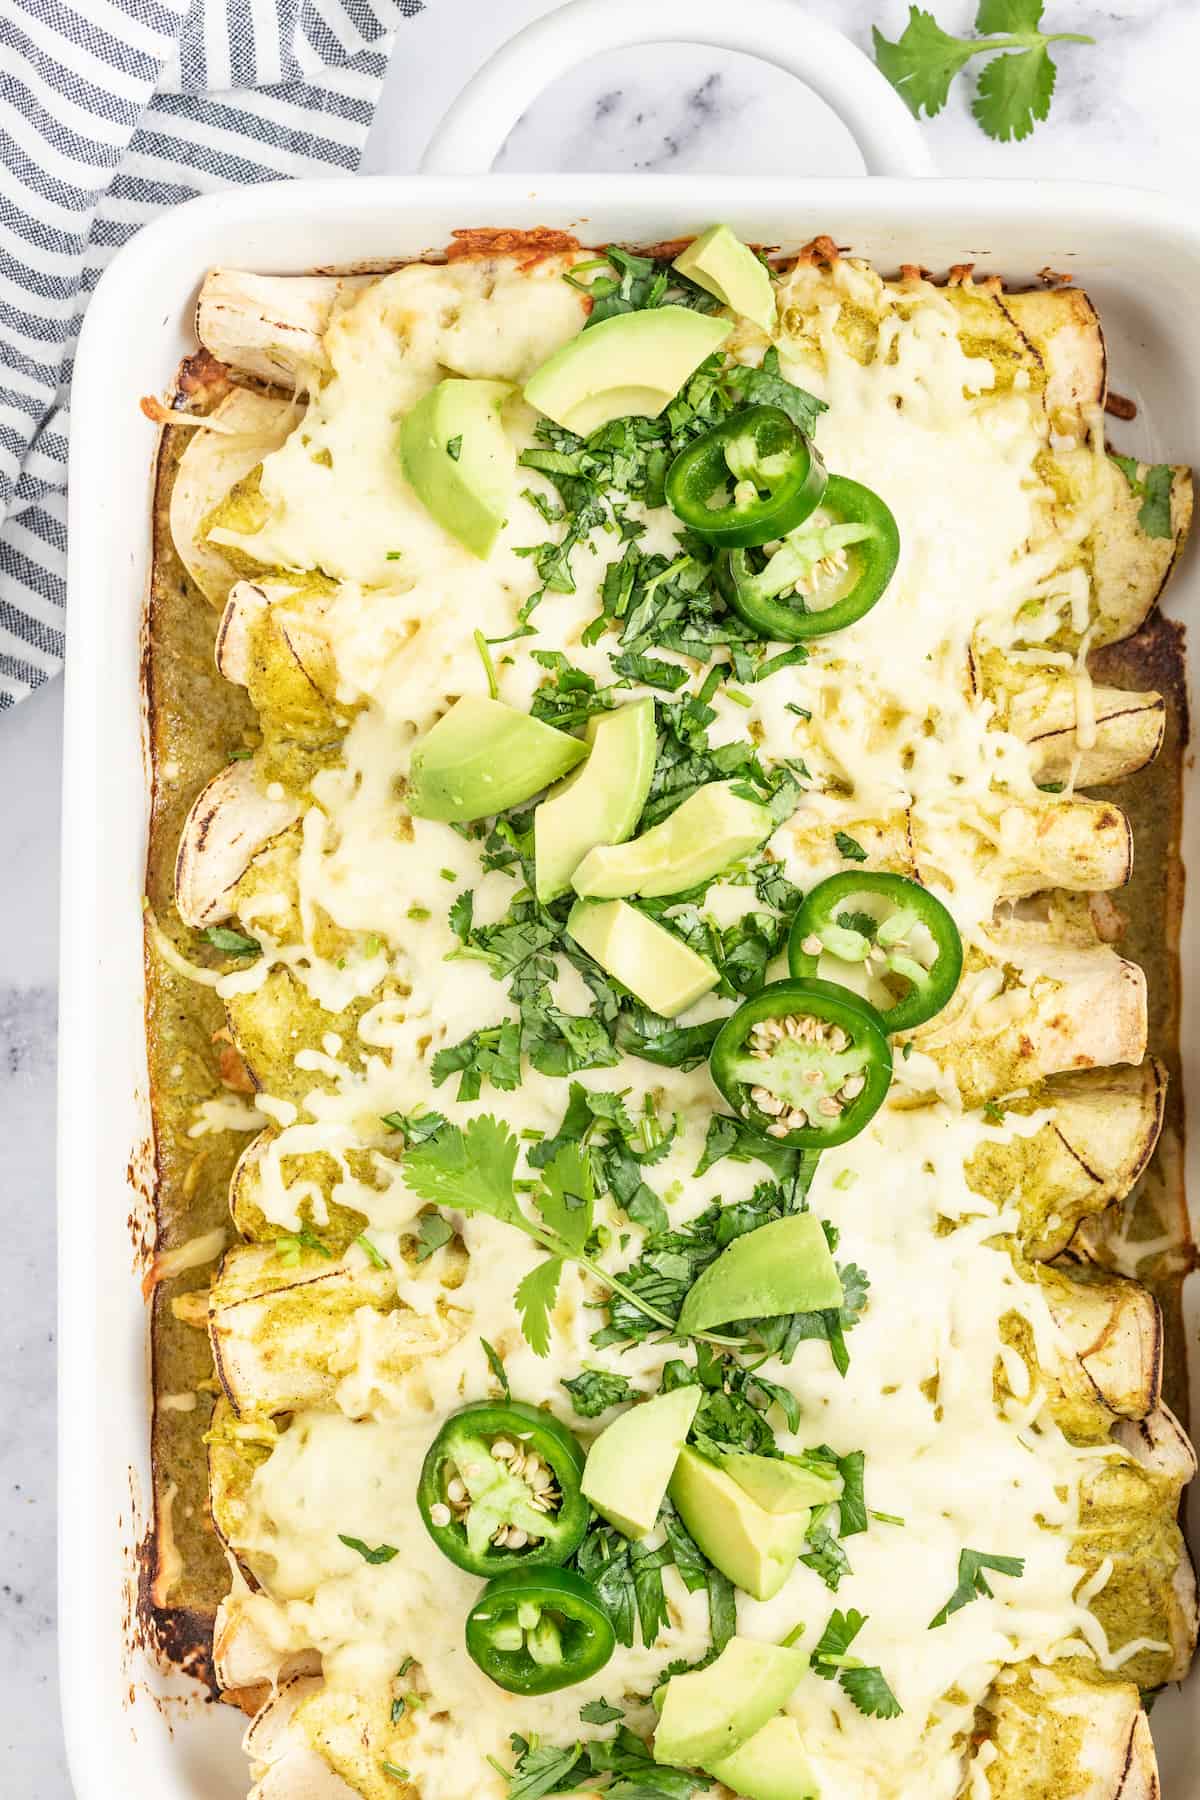 casserole dish with creamy chicken enchiladas verdes with limes and jalapenos as garnishes